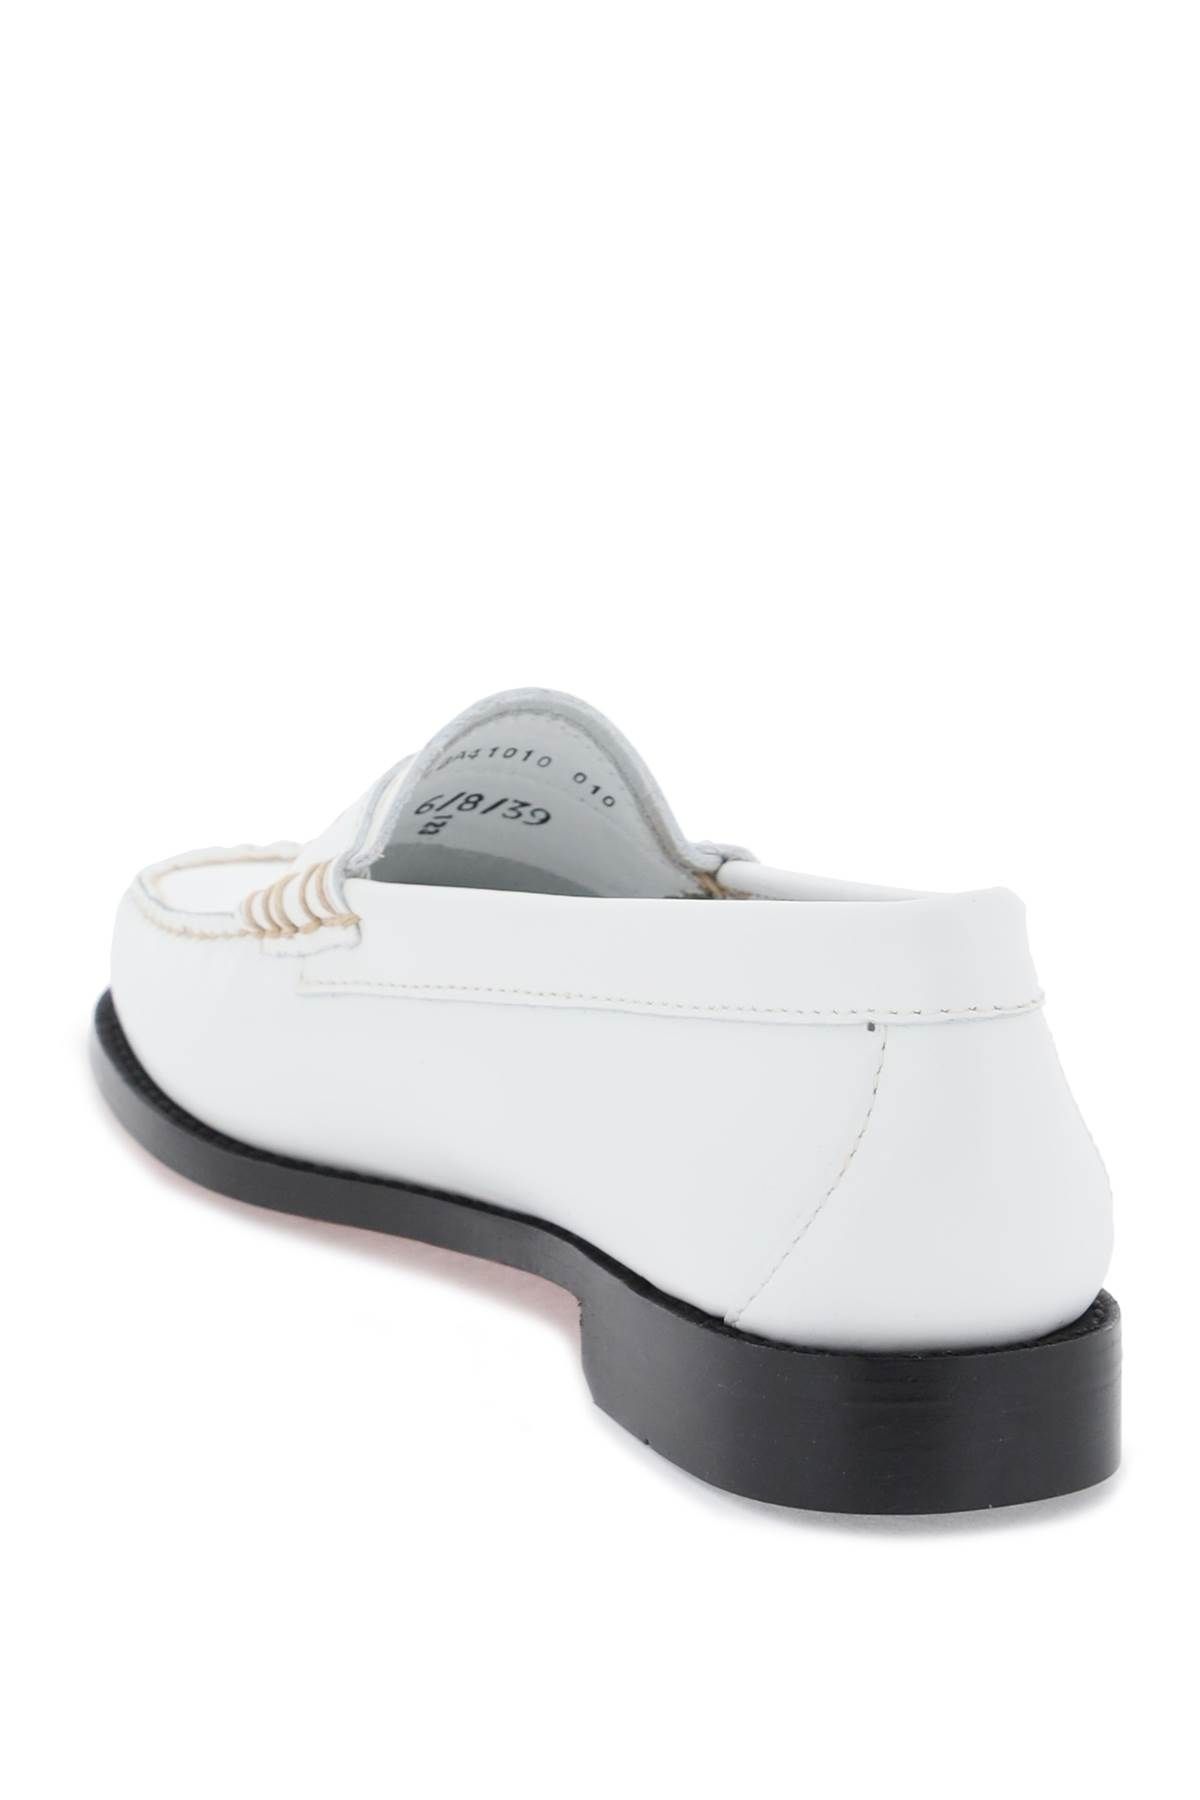 Shop Gh Bass Weejuns Penny Loafers In White